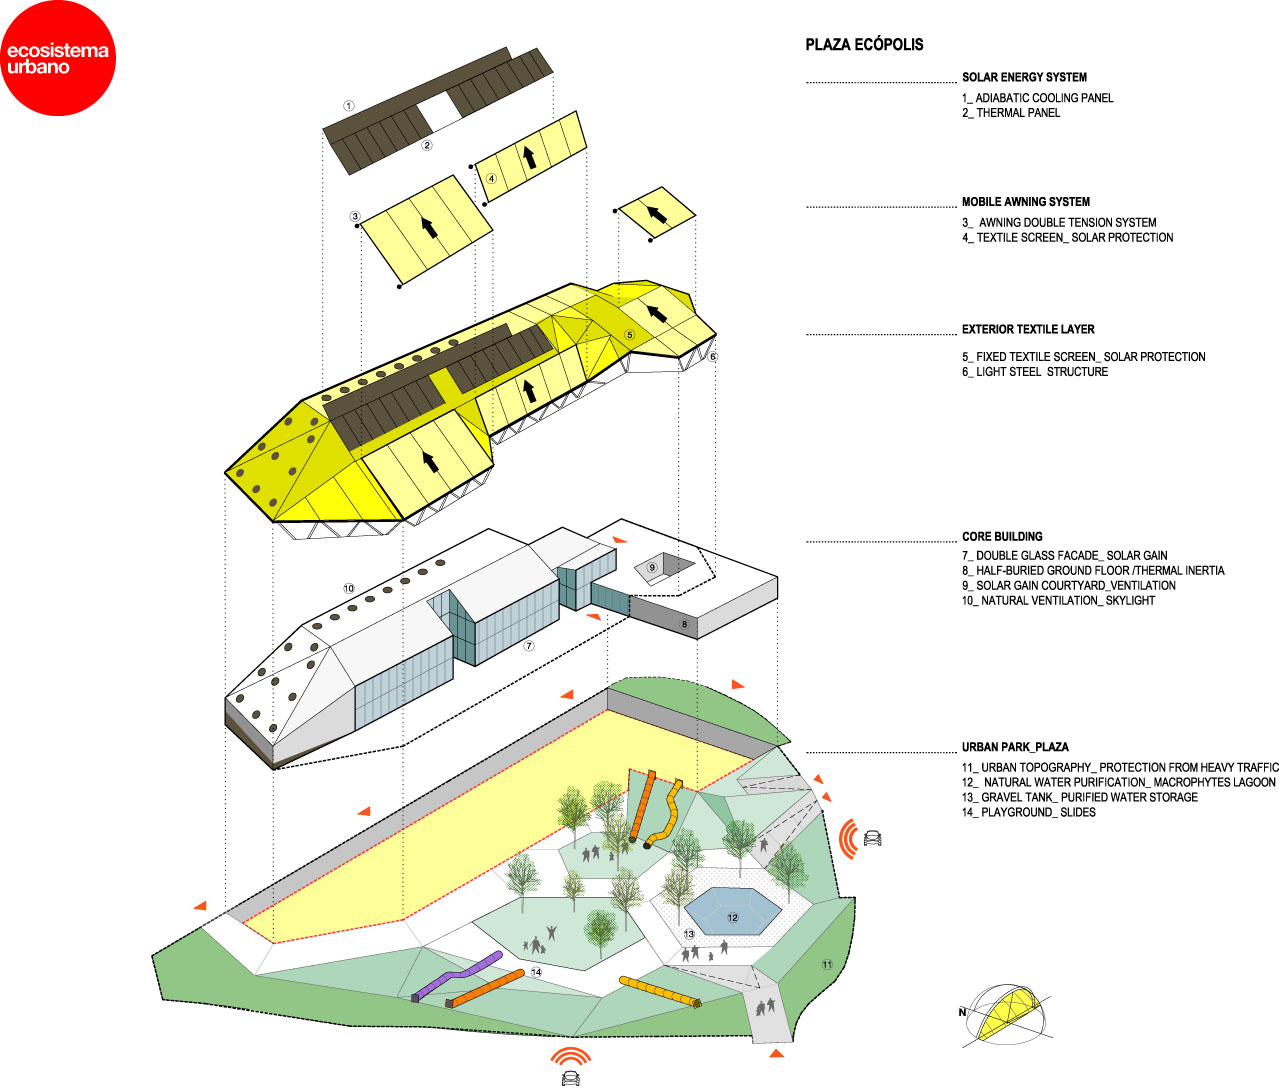 Architectural drawings of the Exopolis Plaza by Ecosistema Urbano